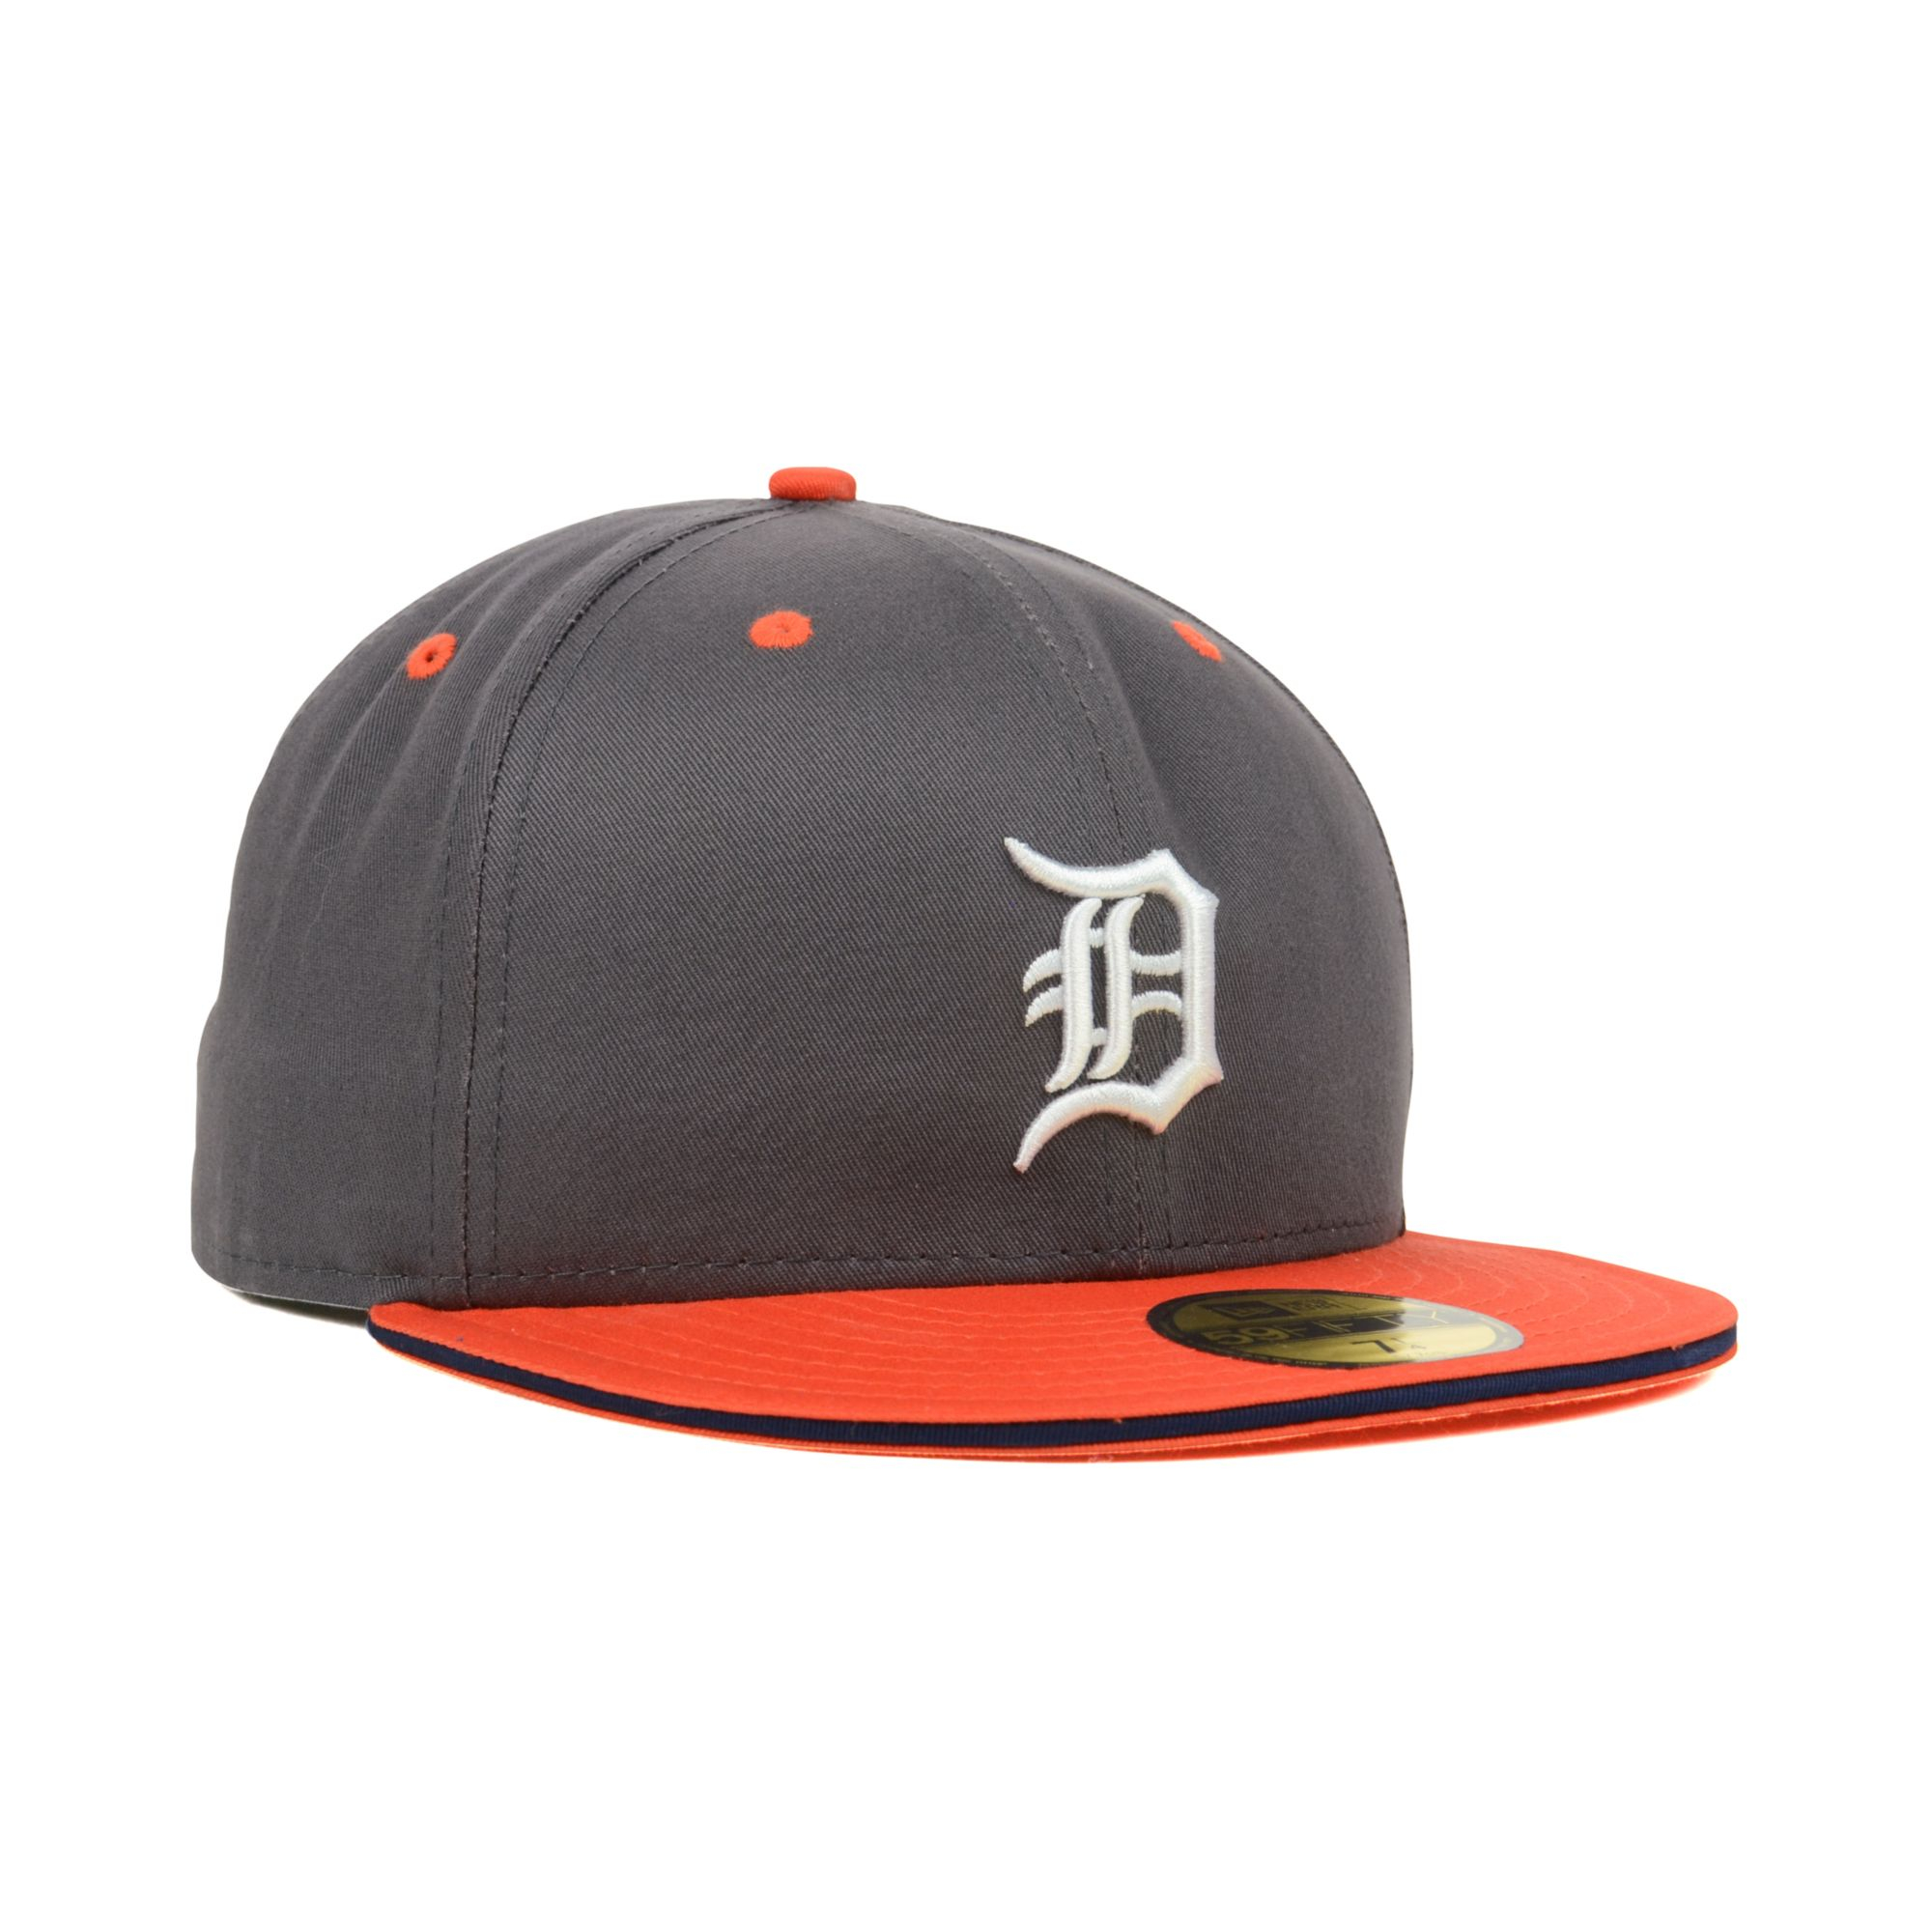 New Era Detroit Tigers Opening Day 59fifty Cap in Orange for Men